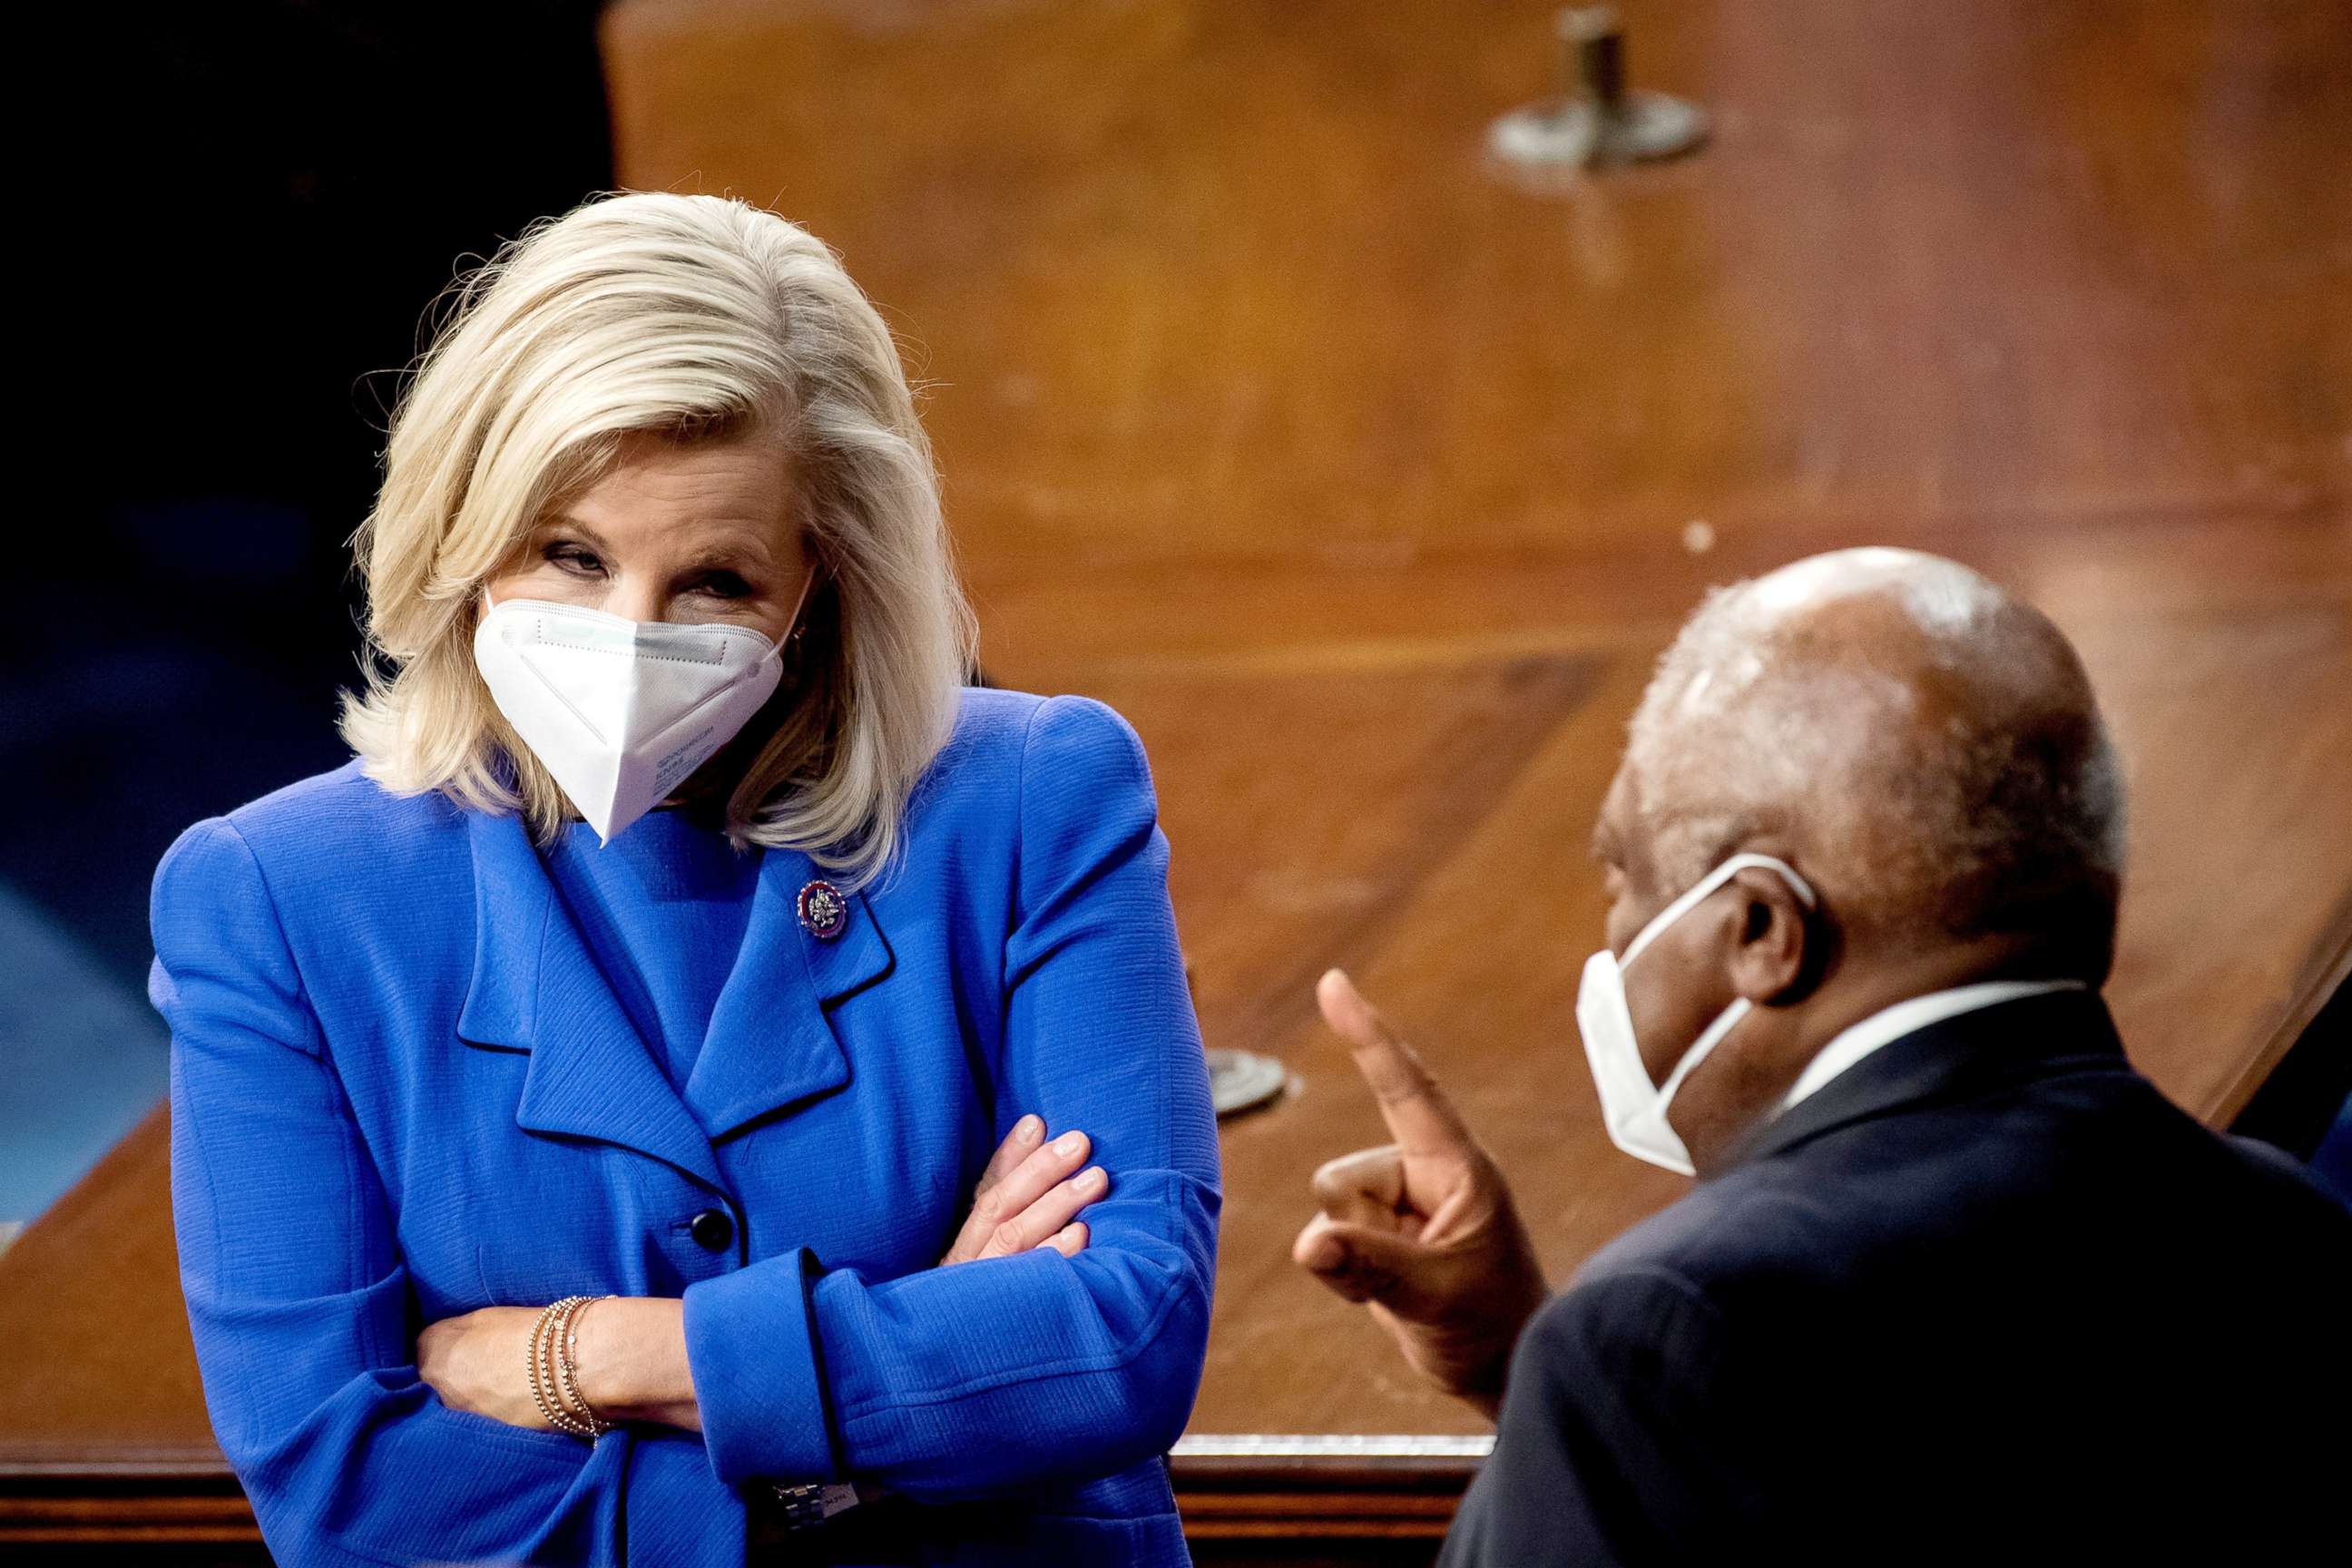 PHOTO: Republican Conference Chair Liz Cheney and House Majority Whip Jim Clyburn talk before the start of President Joe Biden's address to the joint session of Congress at the Capitol, April 28, 2021.